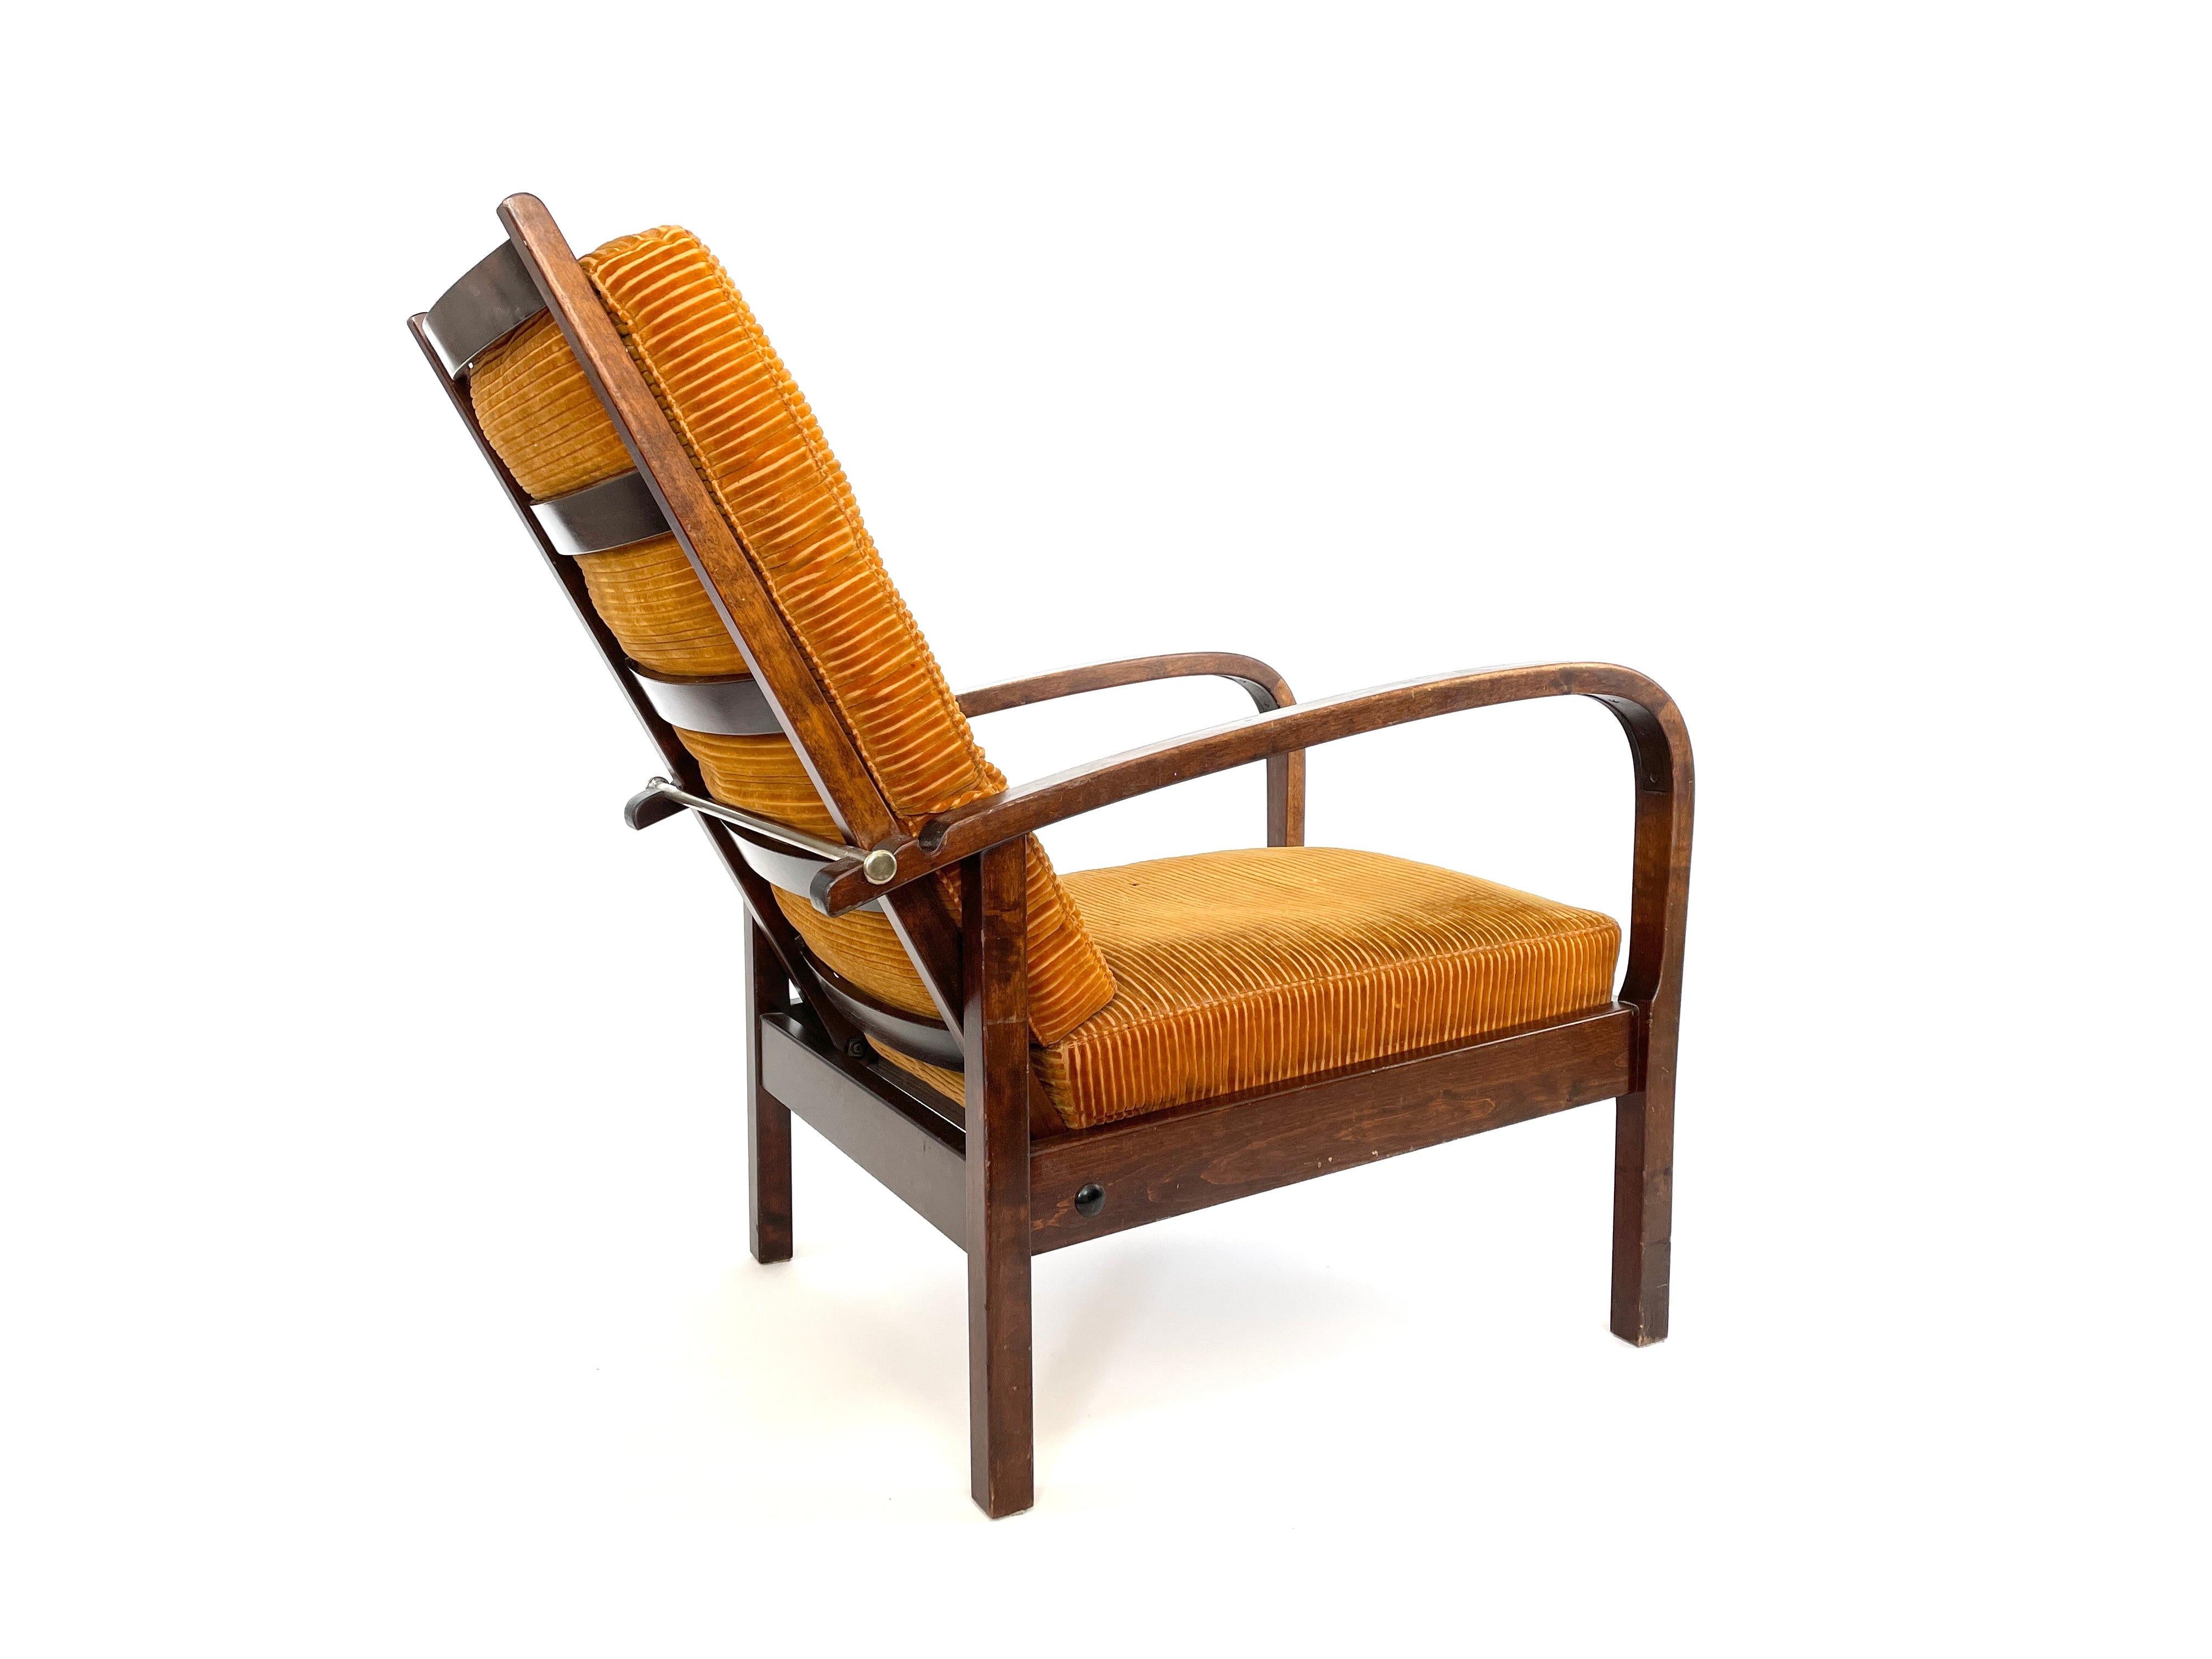 This original Torni Chair by the visionary Einari Kyöstilä was crafted exclusively for the iconic Hotel Torni Helsinki in 1930. It is in good vintage condition with signs of age and use. Removable cushions are with original upholstery. 

The Torni